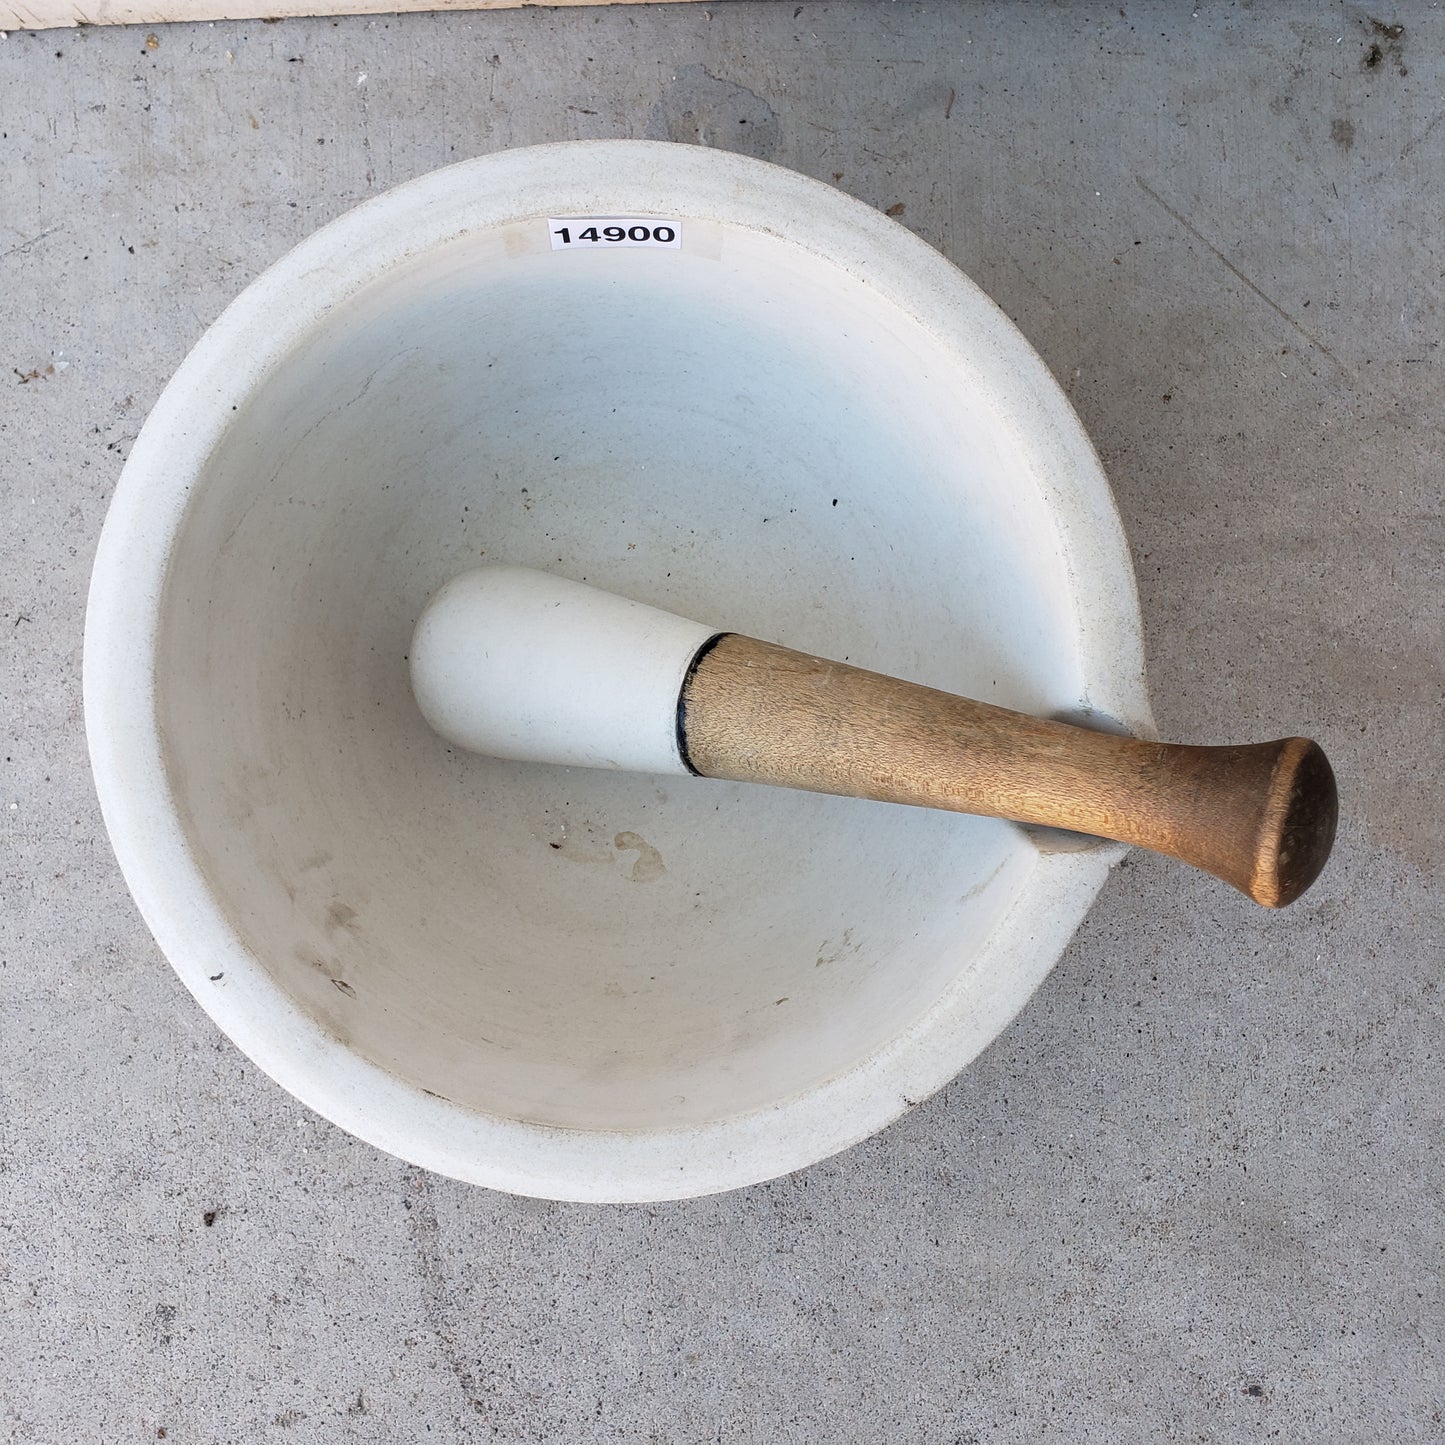 Extra Large Mortar and Pestle